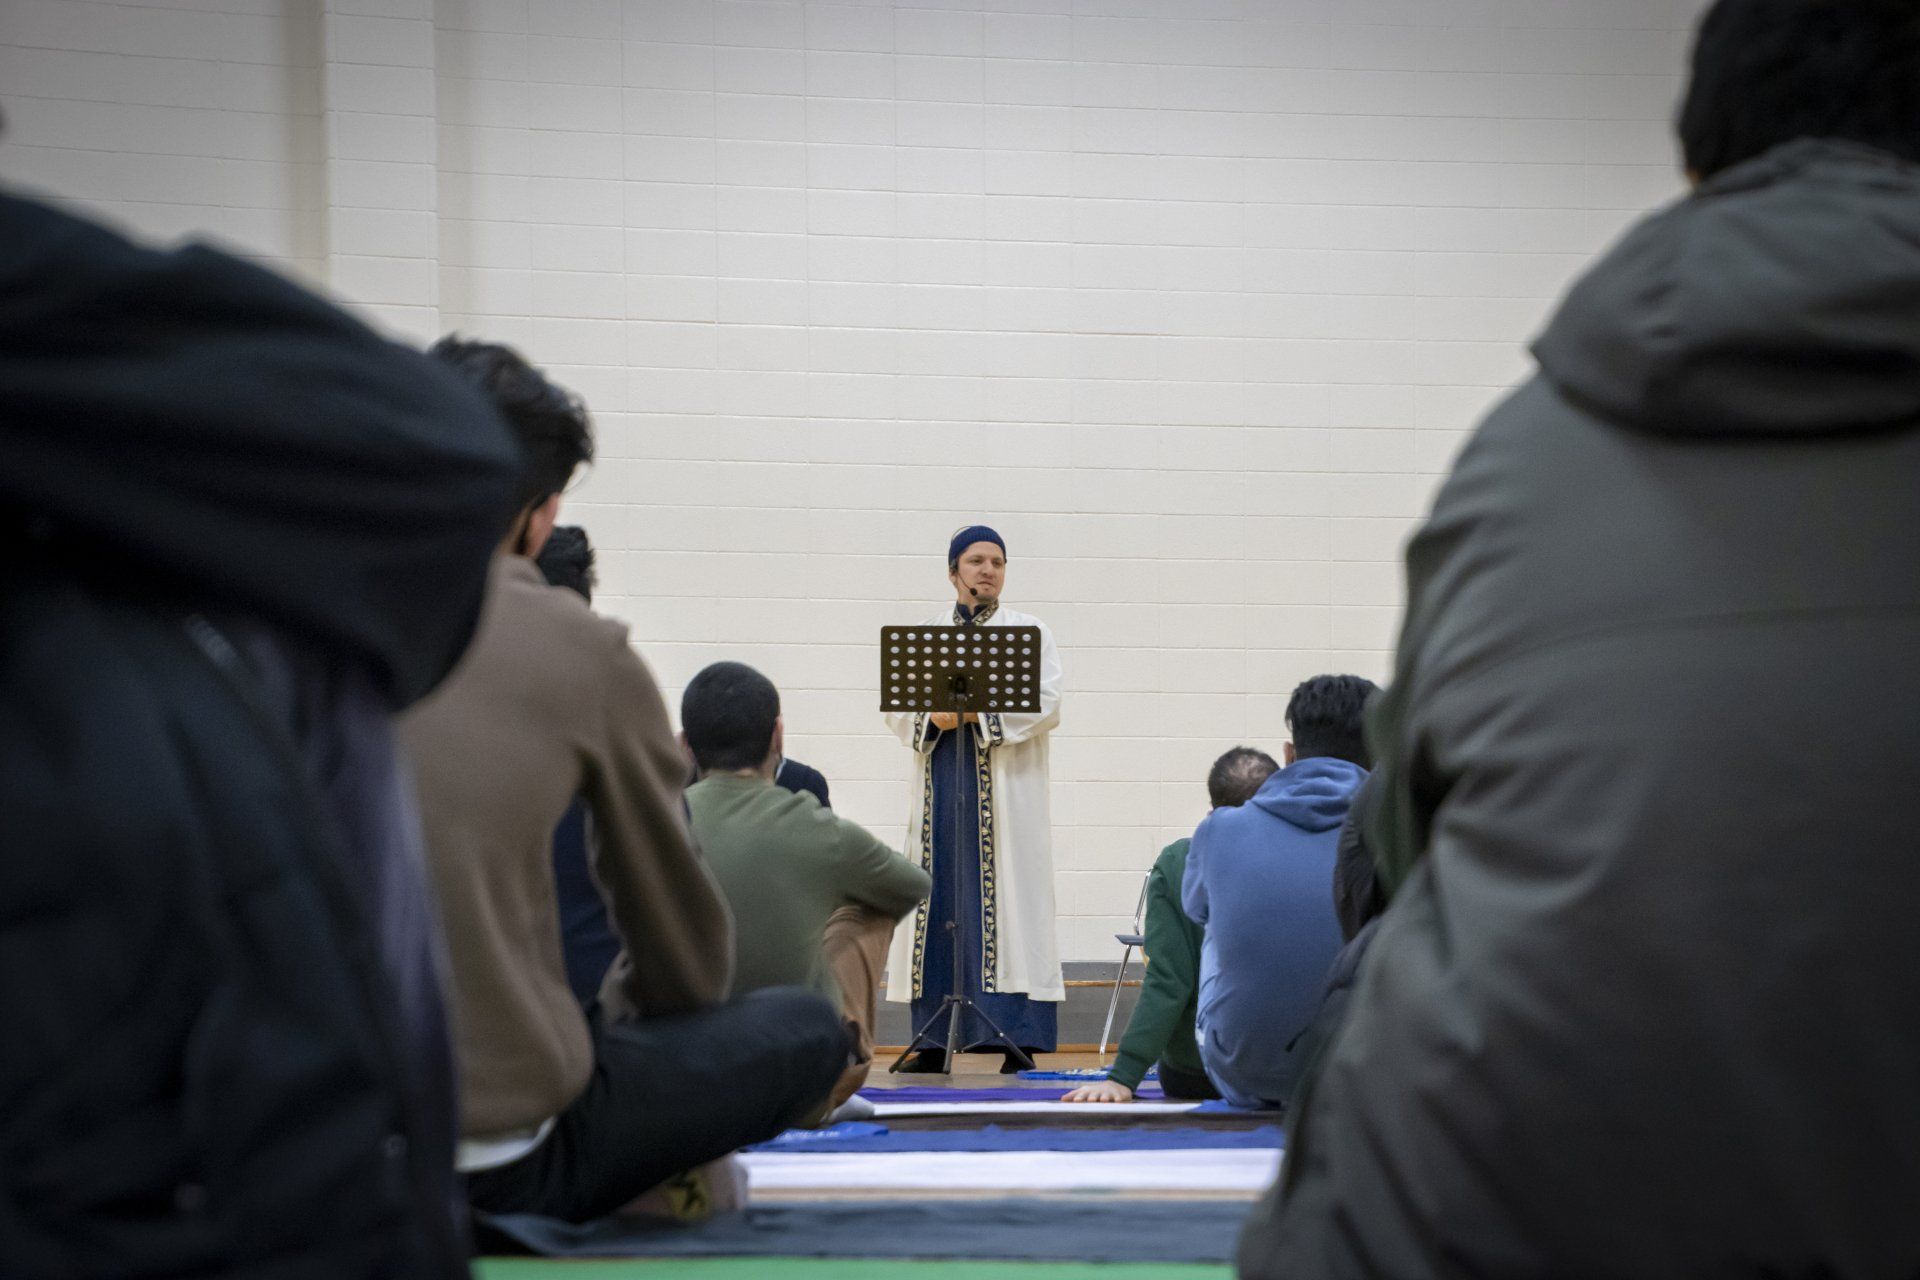 A picture taken during the weekly MSA jummah